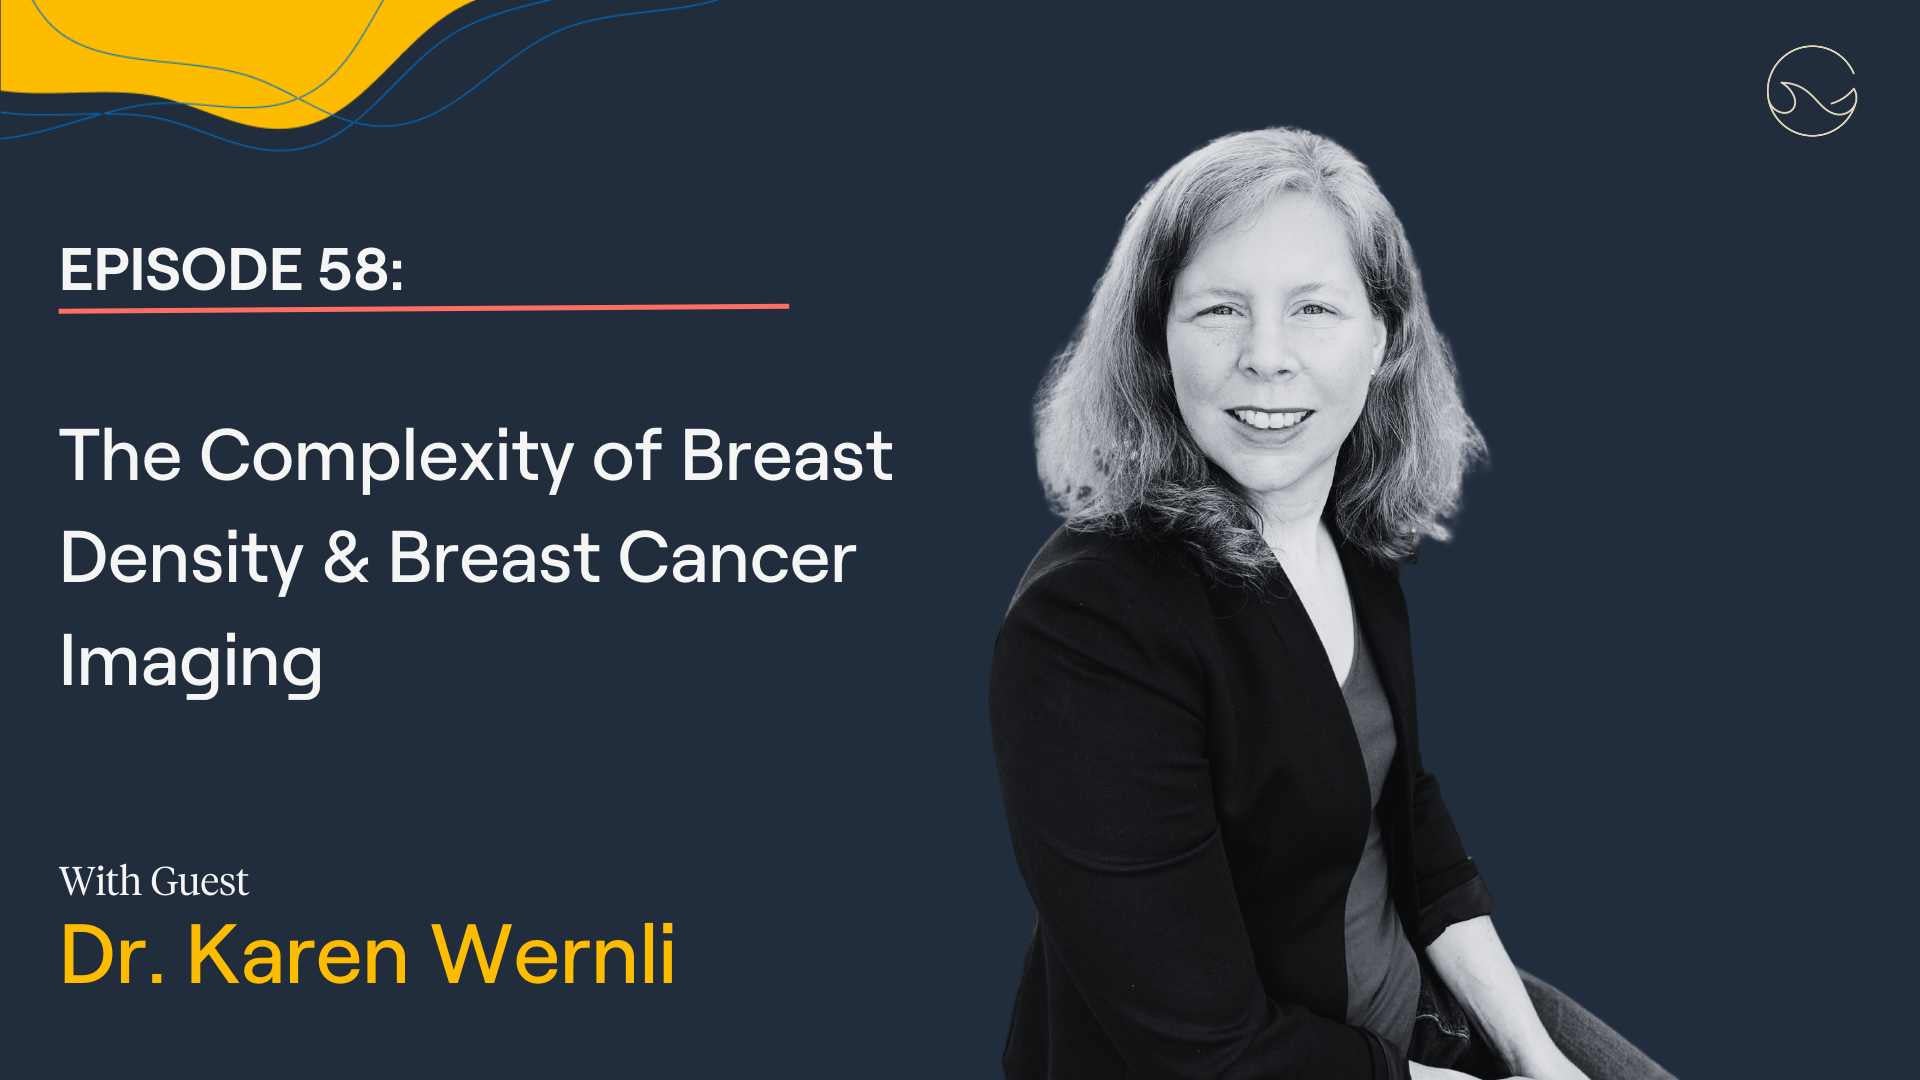 Load video: The latest episode of &quot;The Patient from Hell&quot; features Karen Wernli PhD talking about breast density and breast cancer screening.